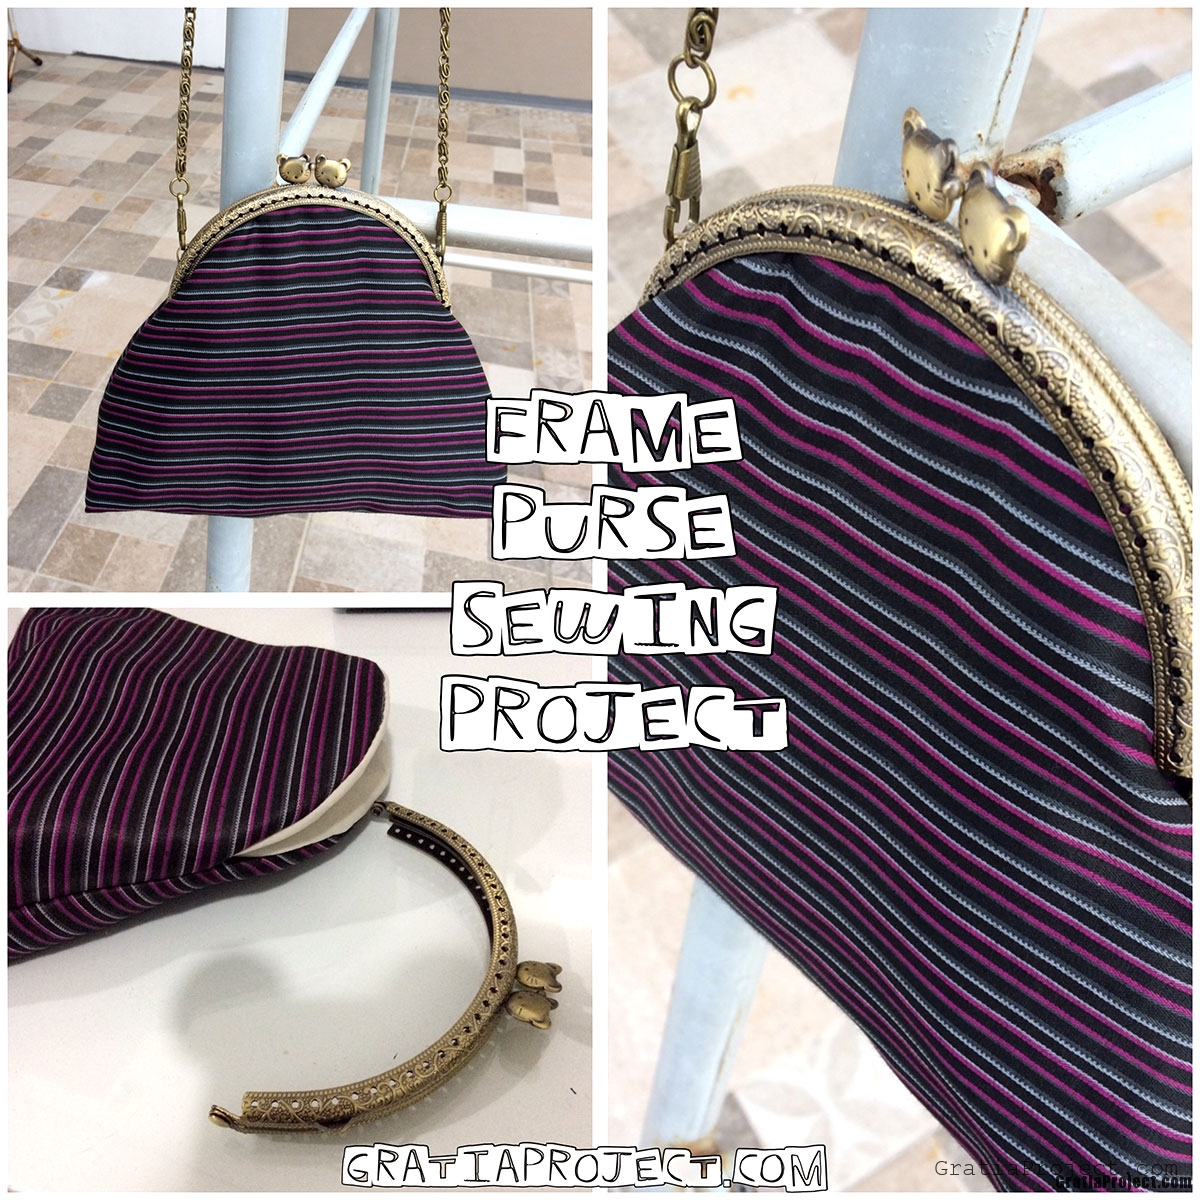 Frame Purse Crossbody Bag Sewing Project